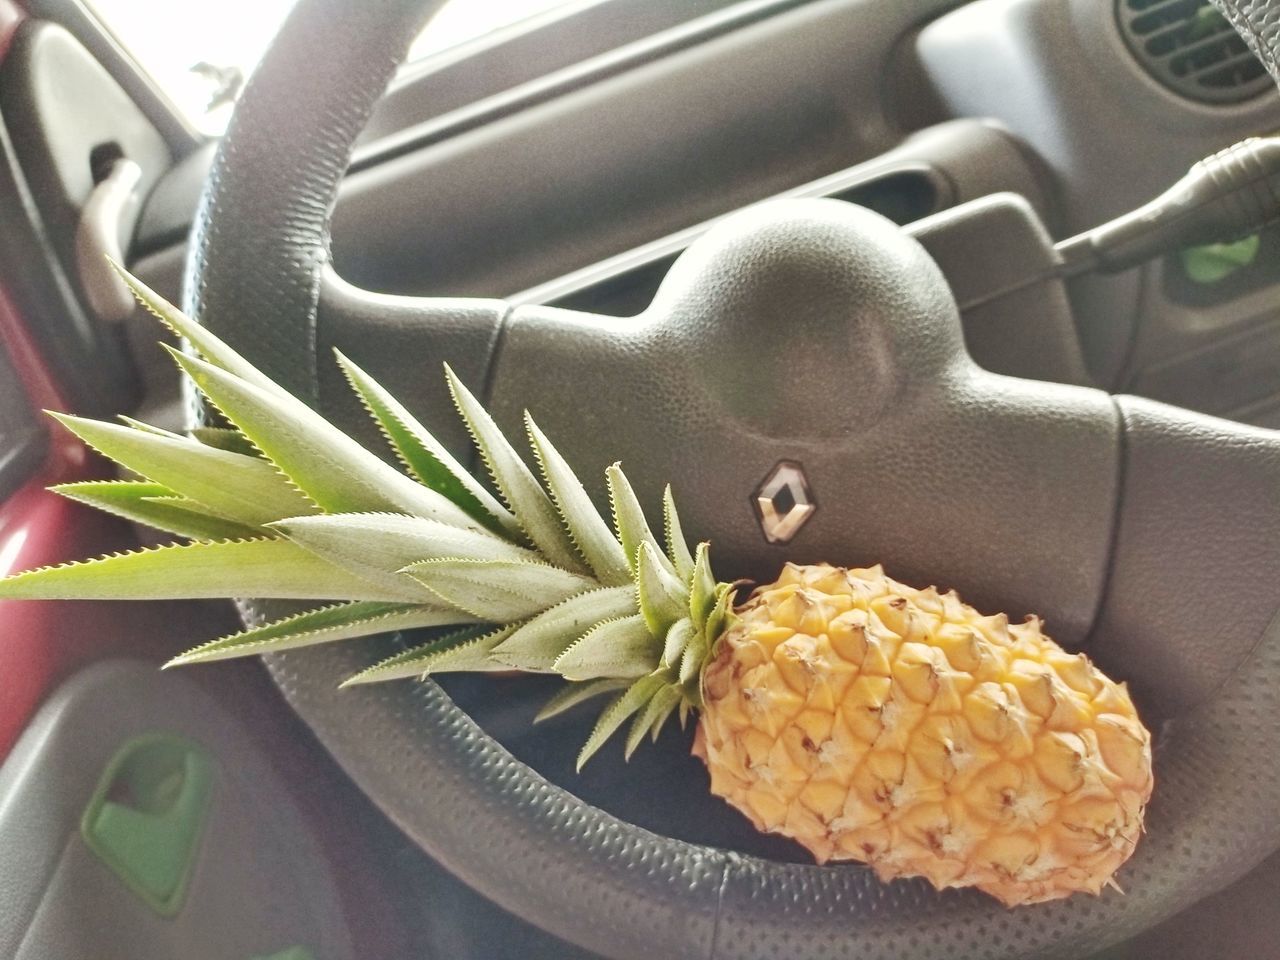 food, mode of transportation, car, motor vehicle, food and drink, transportation, plant, vehicle, car interior, pineapple, no people, indoors, close-up, vehicle interior, freshness, flower, wellbeing, produce, nature